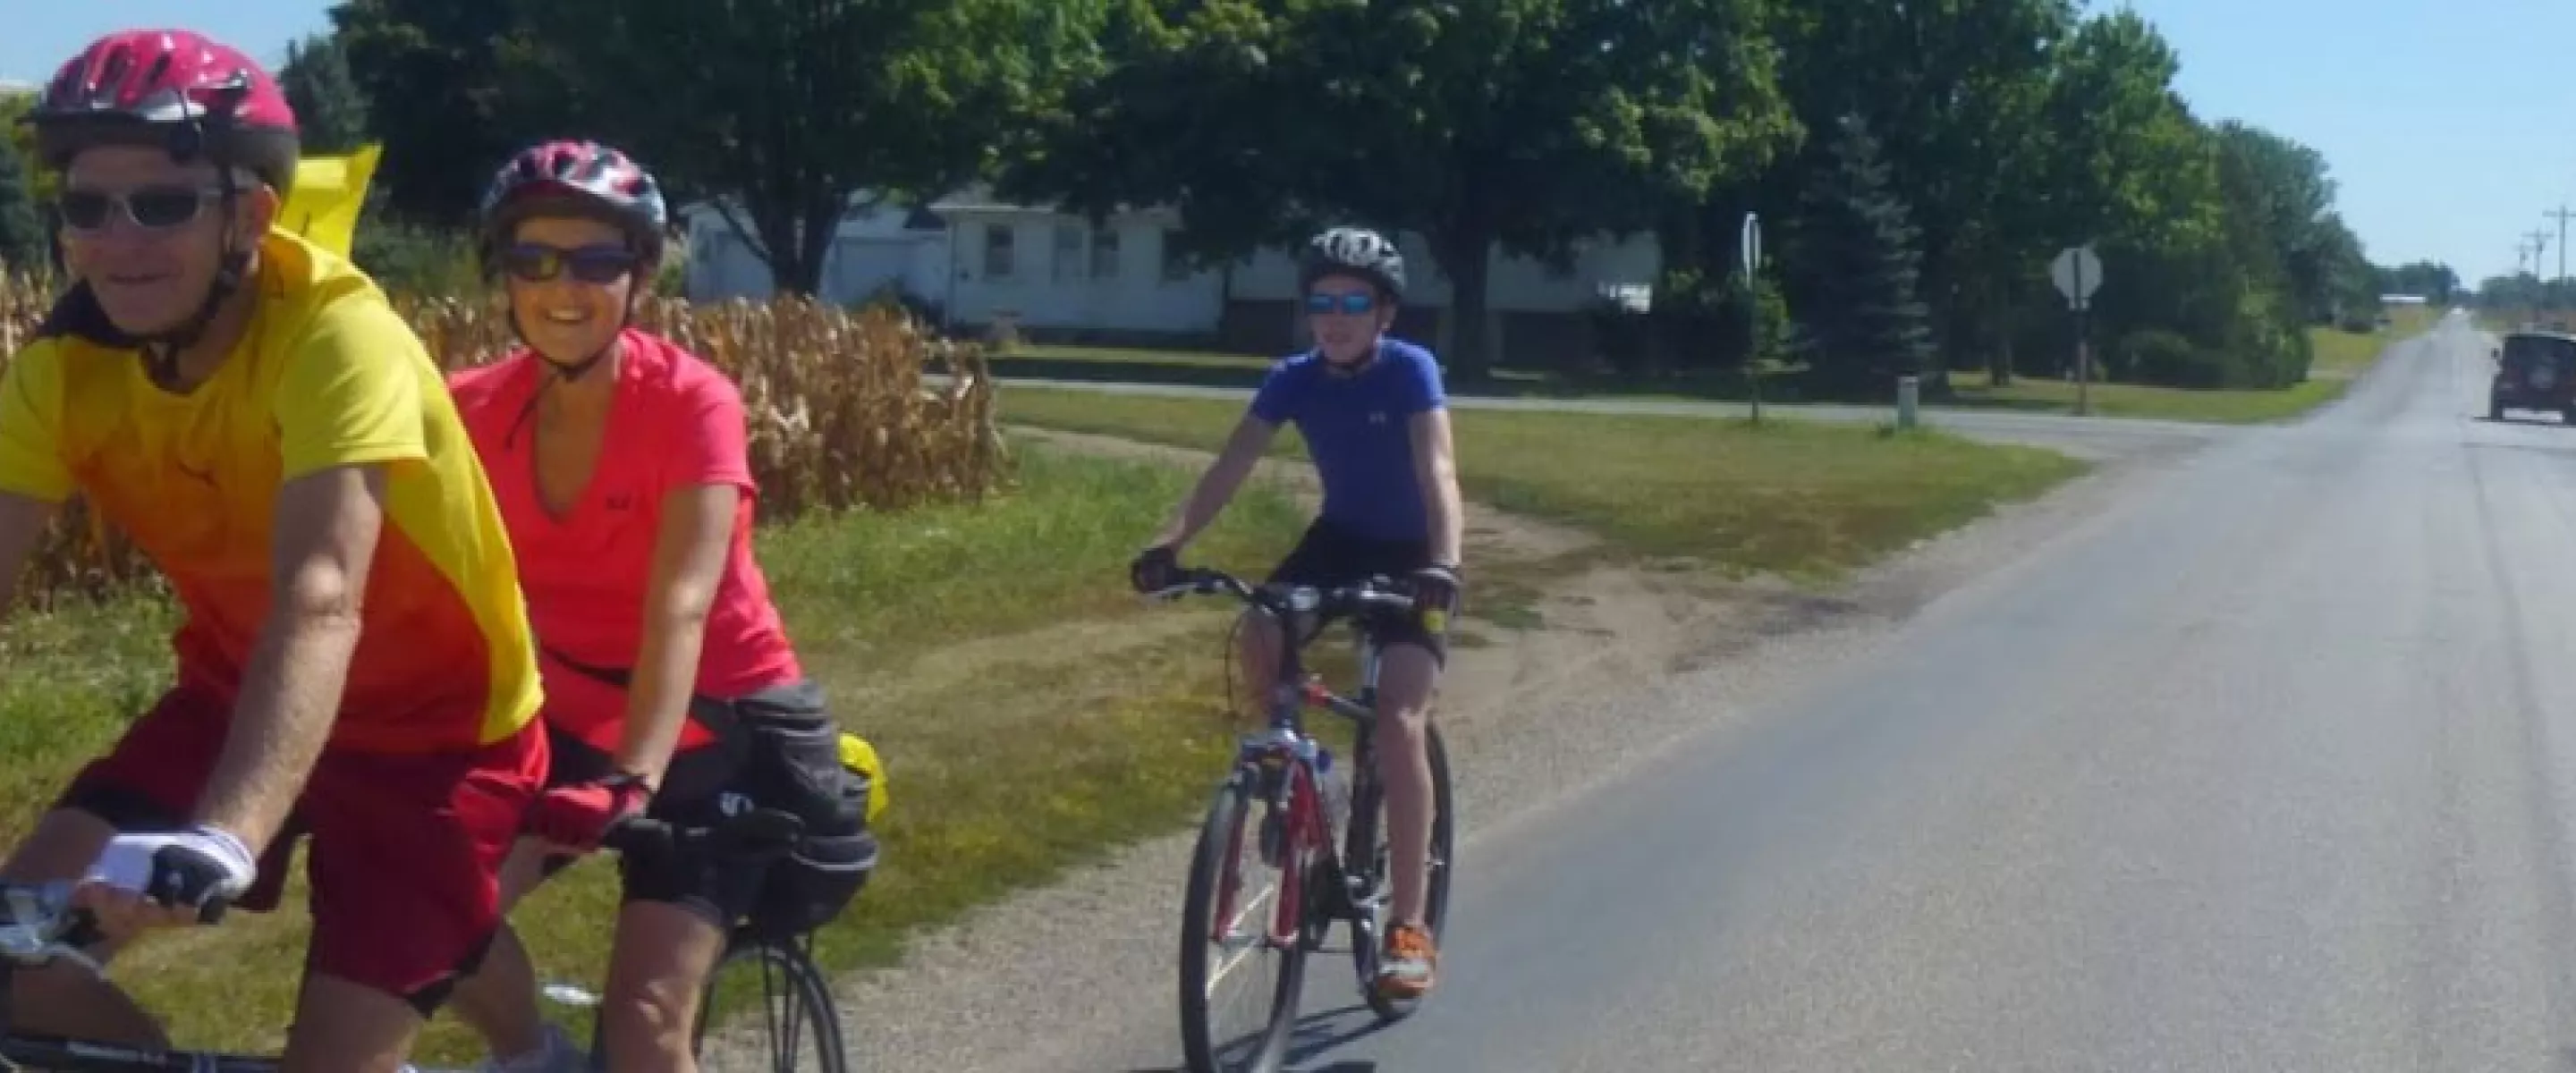 Two people ride a tandem bike while another cyclist follows behind them.